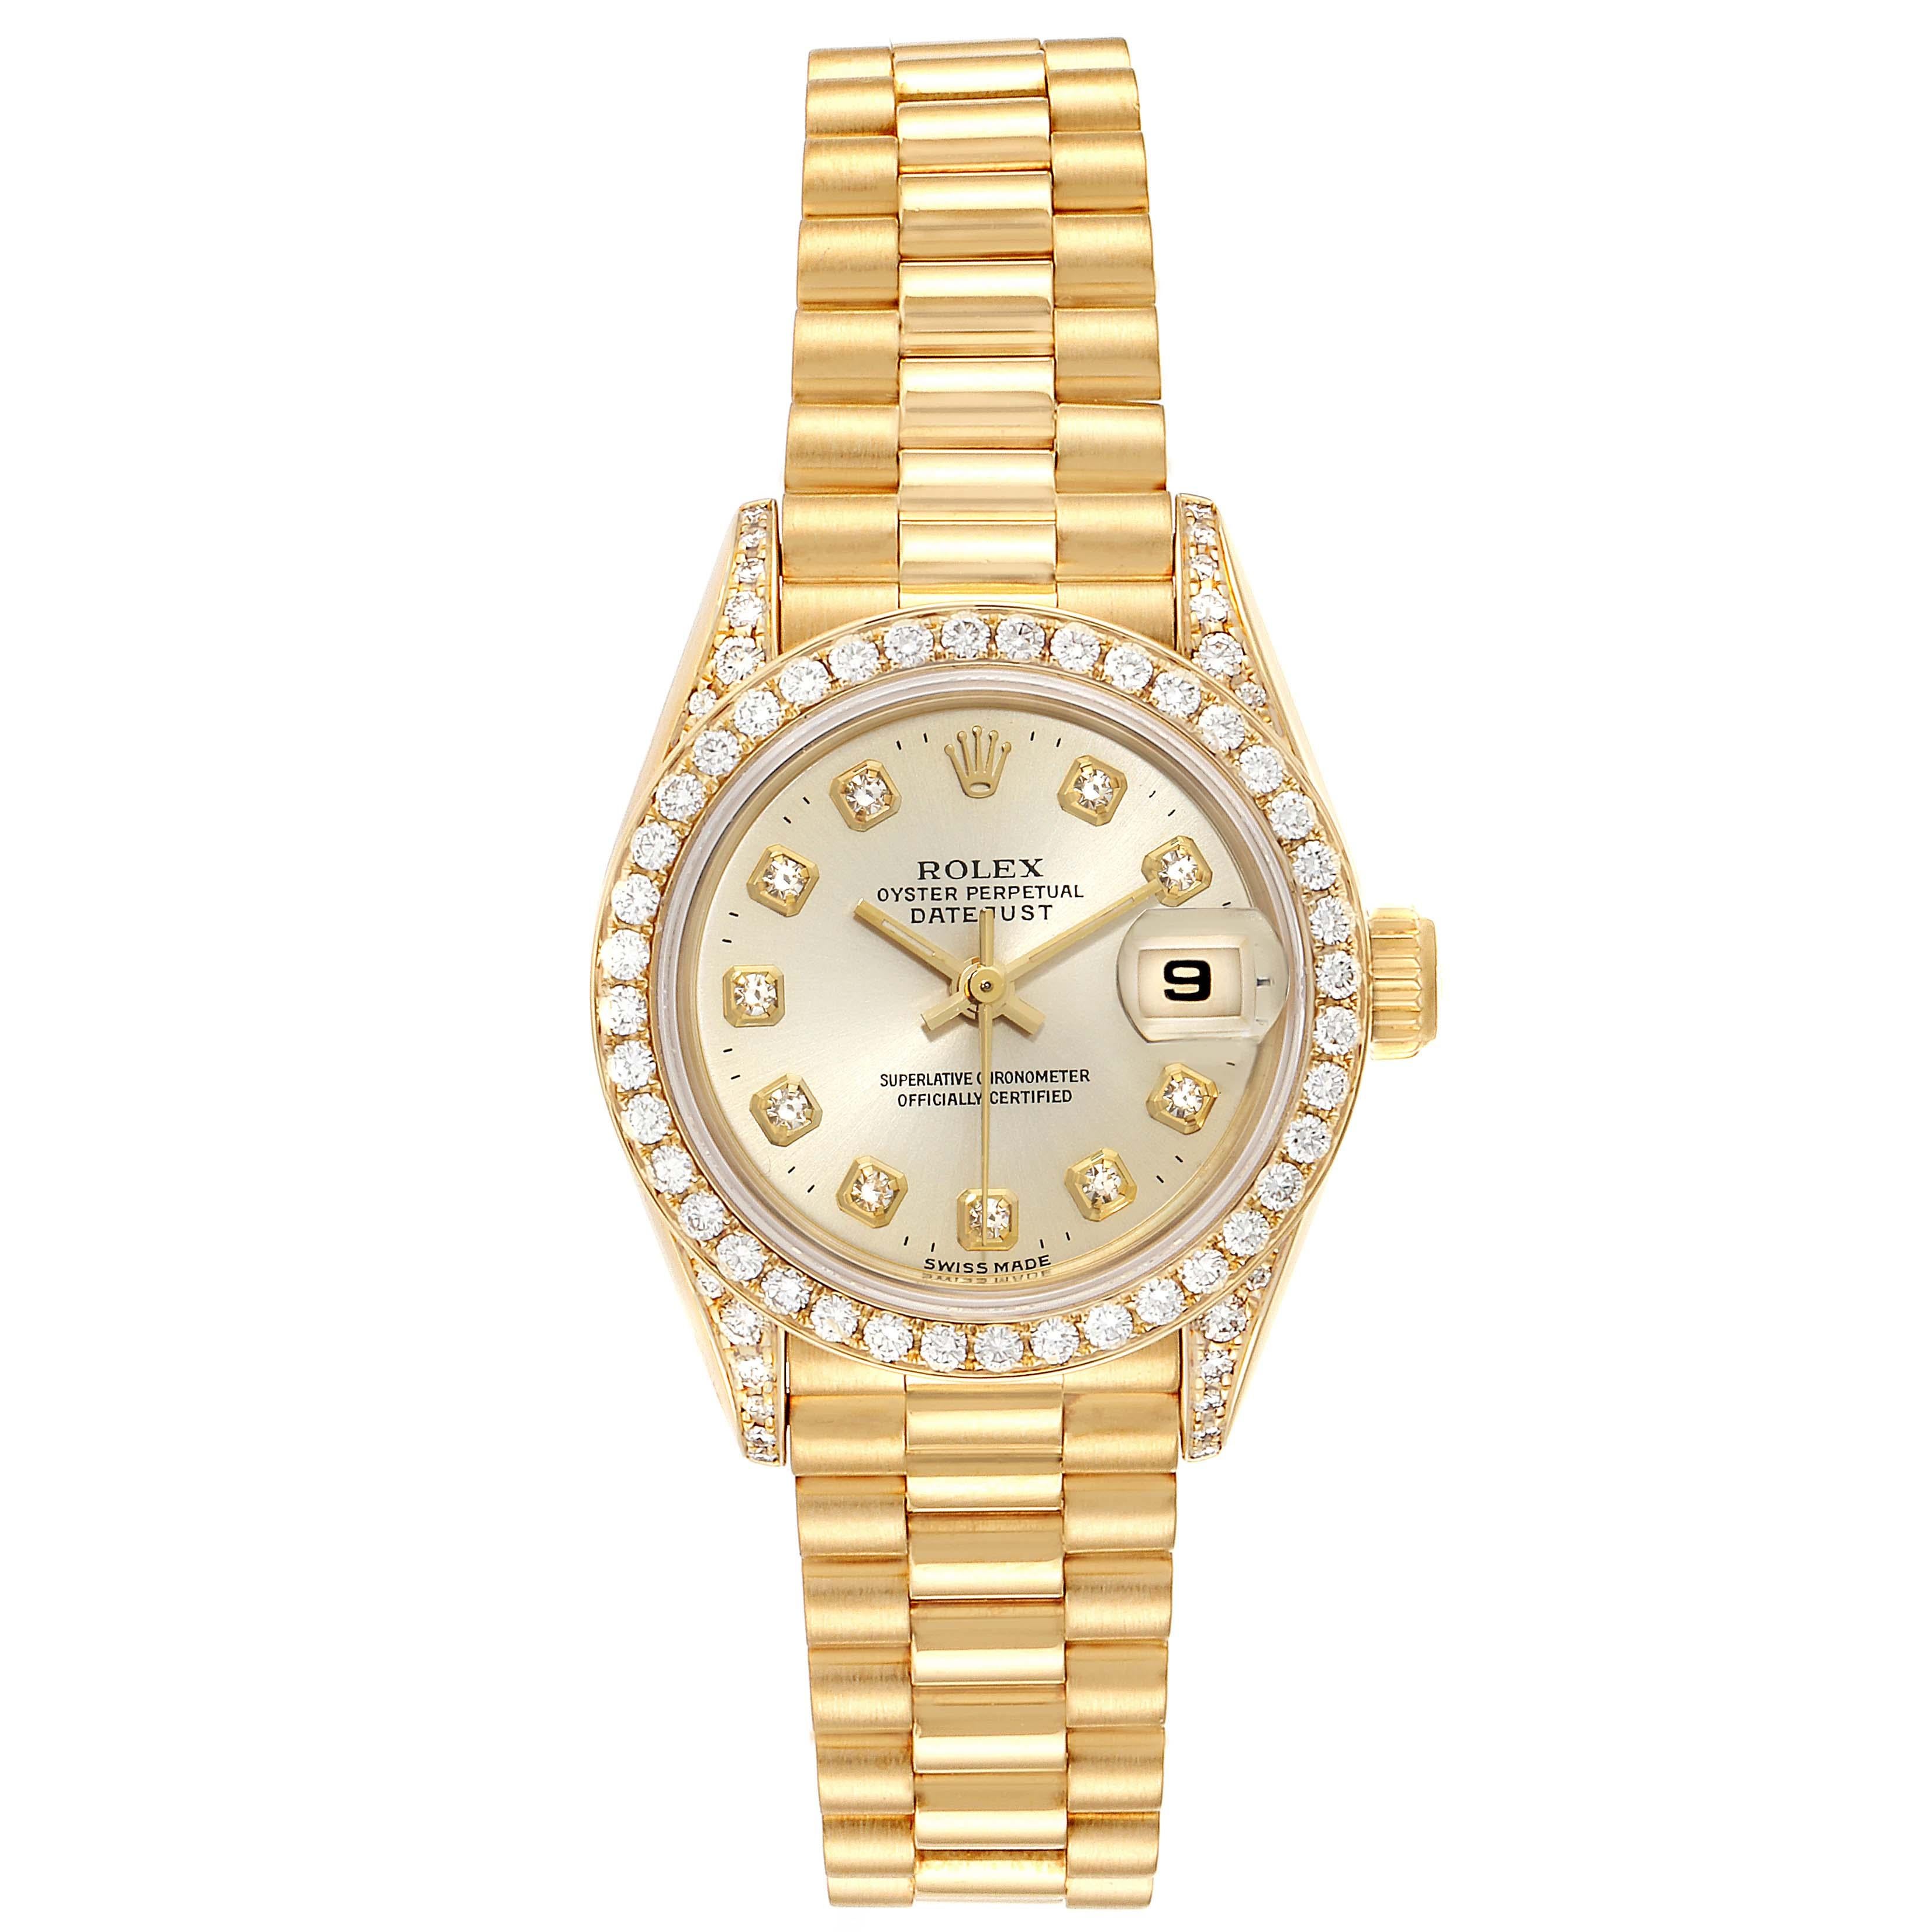 Rolex President Datejust 26mm Yellow Gold Diamond Ladies Watch 69238. Officially certified chronometer self-winding movement. 18k yellow gold oyster case 26.0 mm in diameter. Rolex logo on a crown. Original Rolex factory diamond lugs. Original Rolex